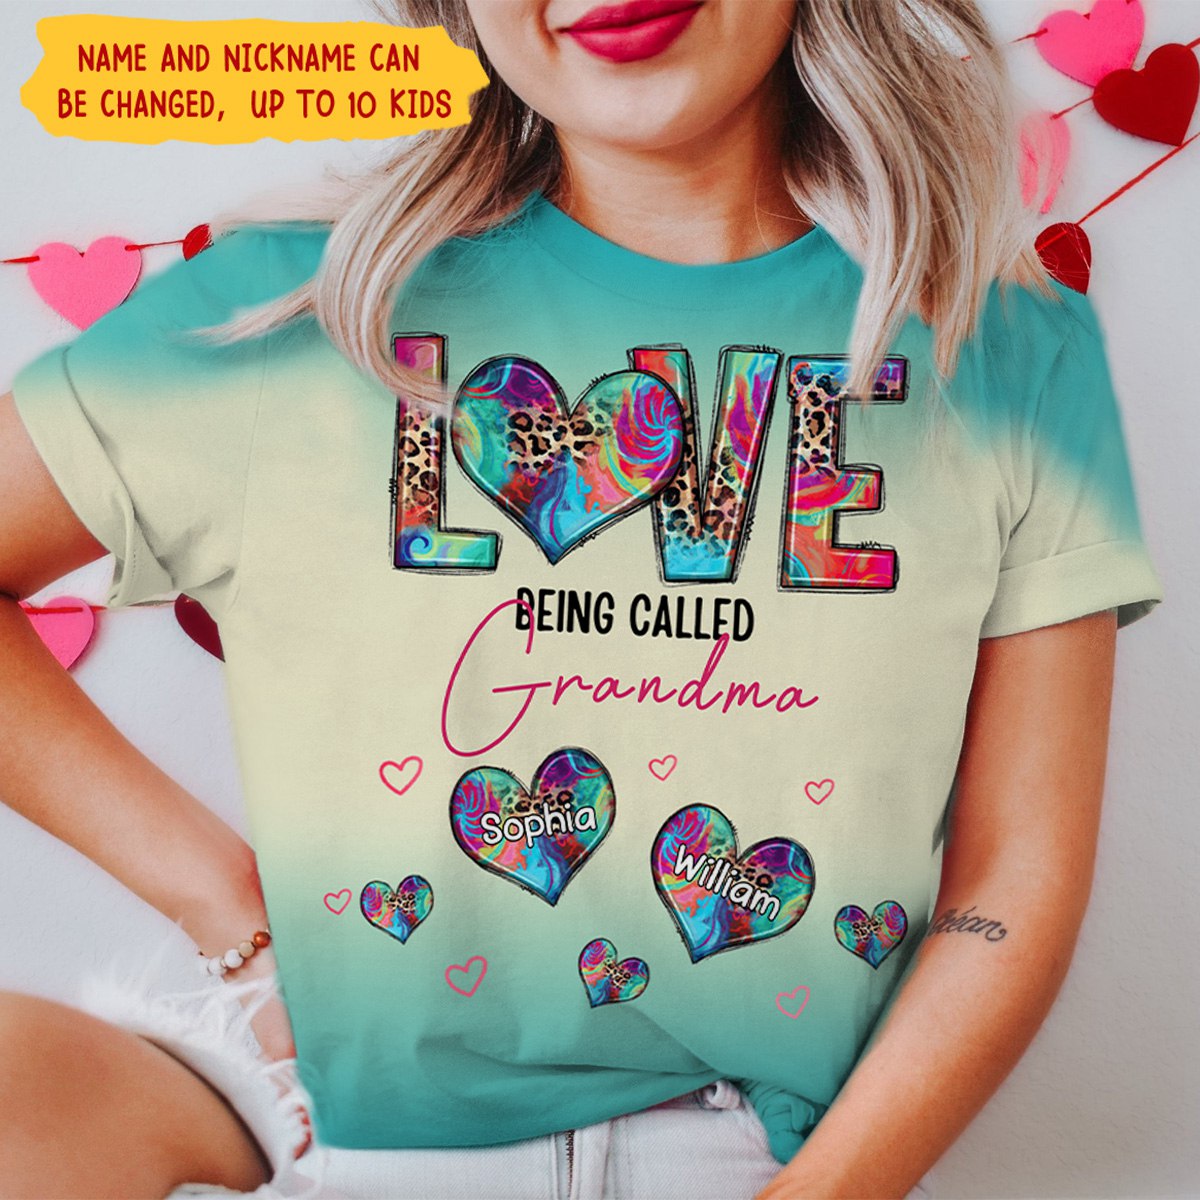 Love Being Called Grandma Teal Color Turquoise Color Personalized 3D T-shirt